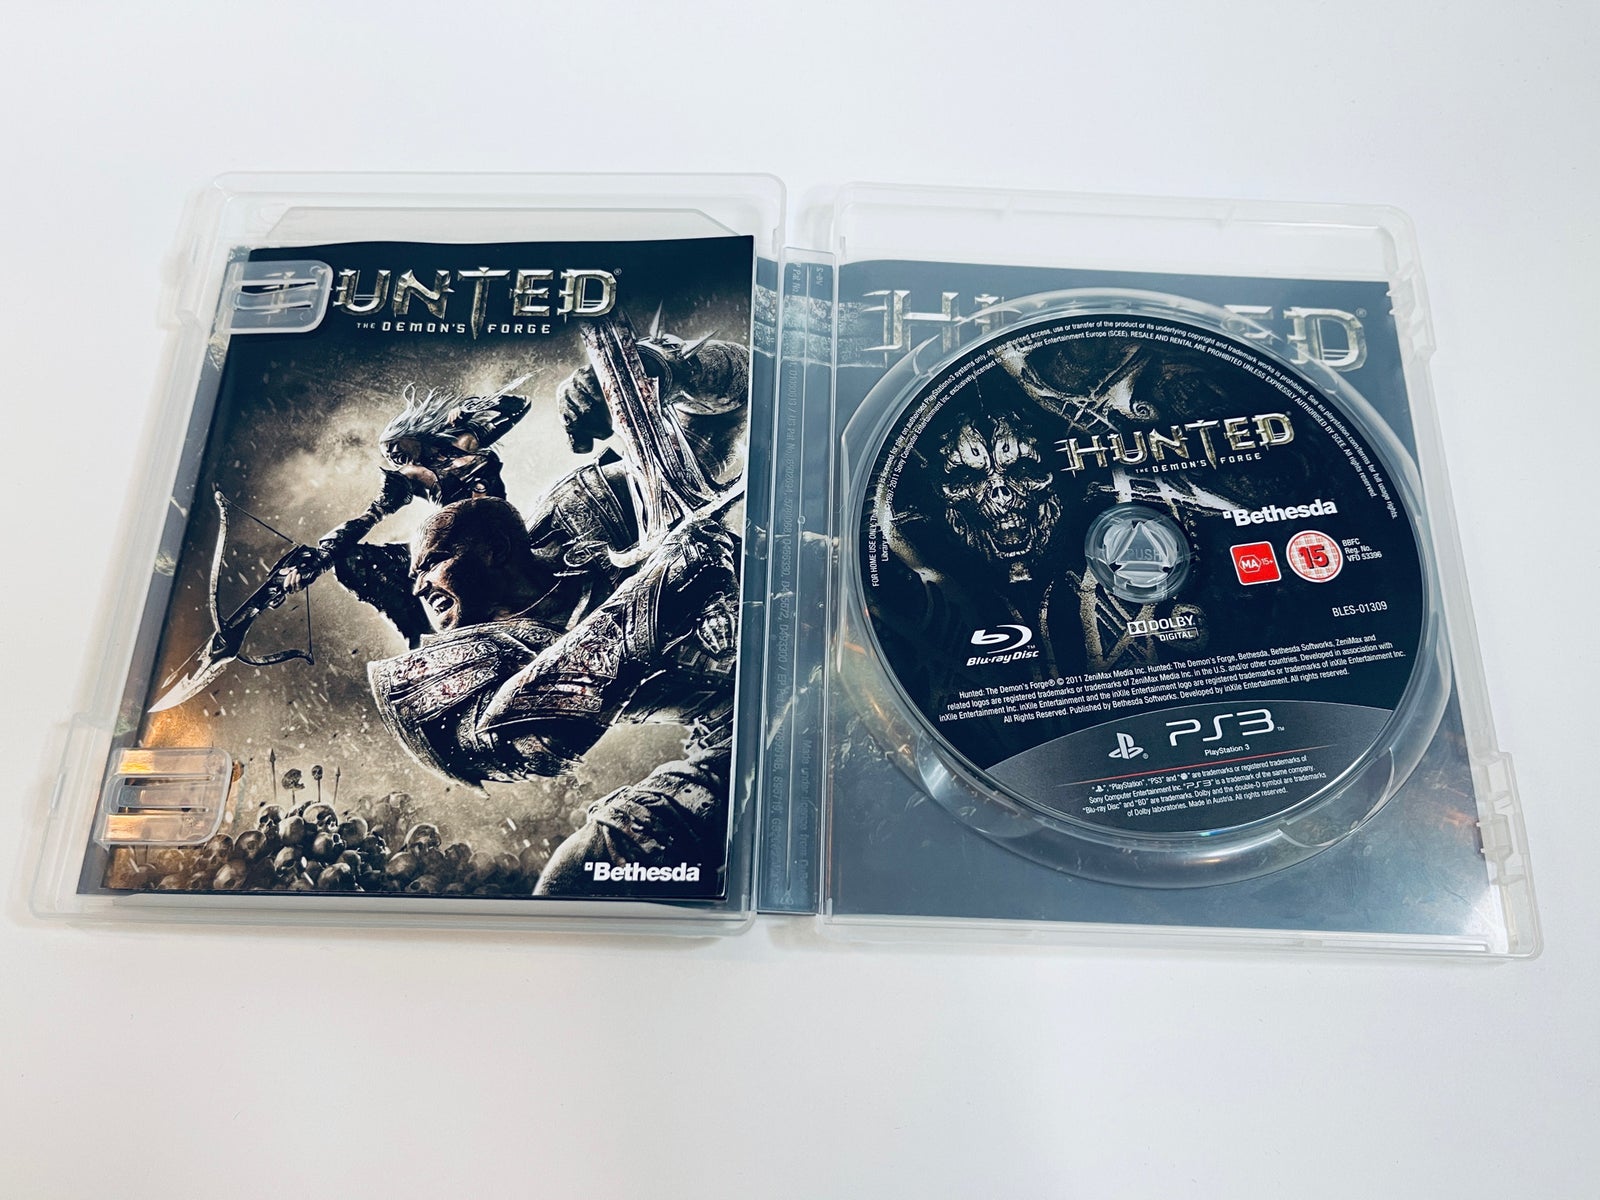 Hunted The Demon’s Forge, Playstation 3, PS3